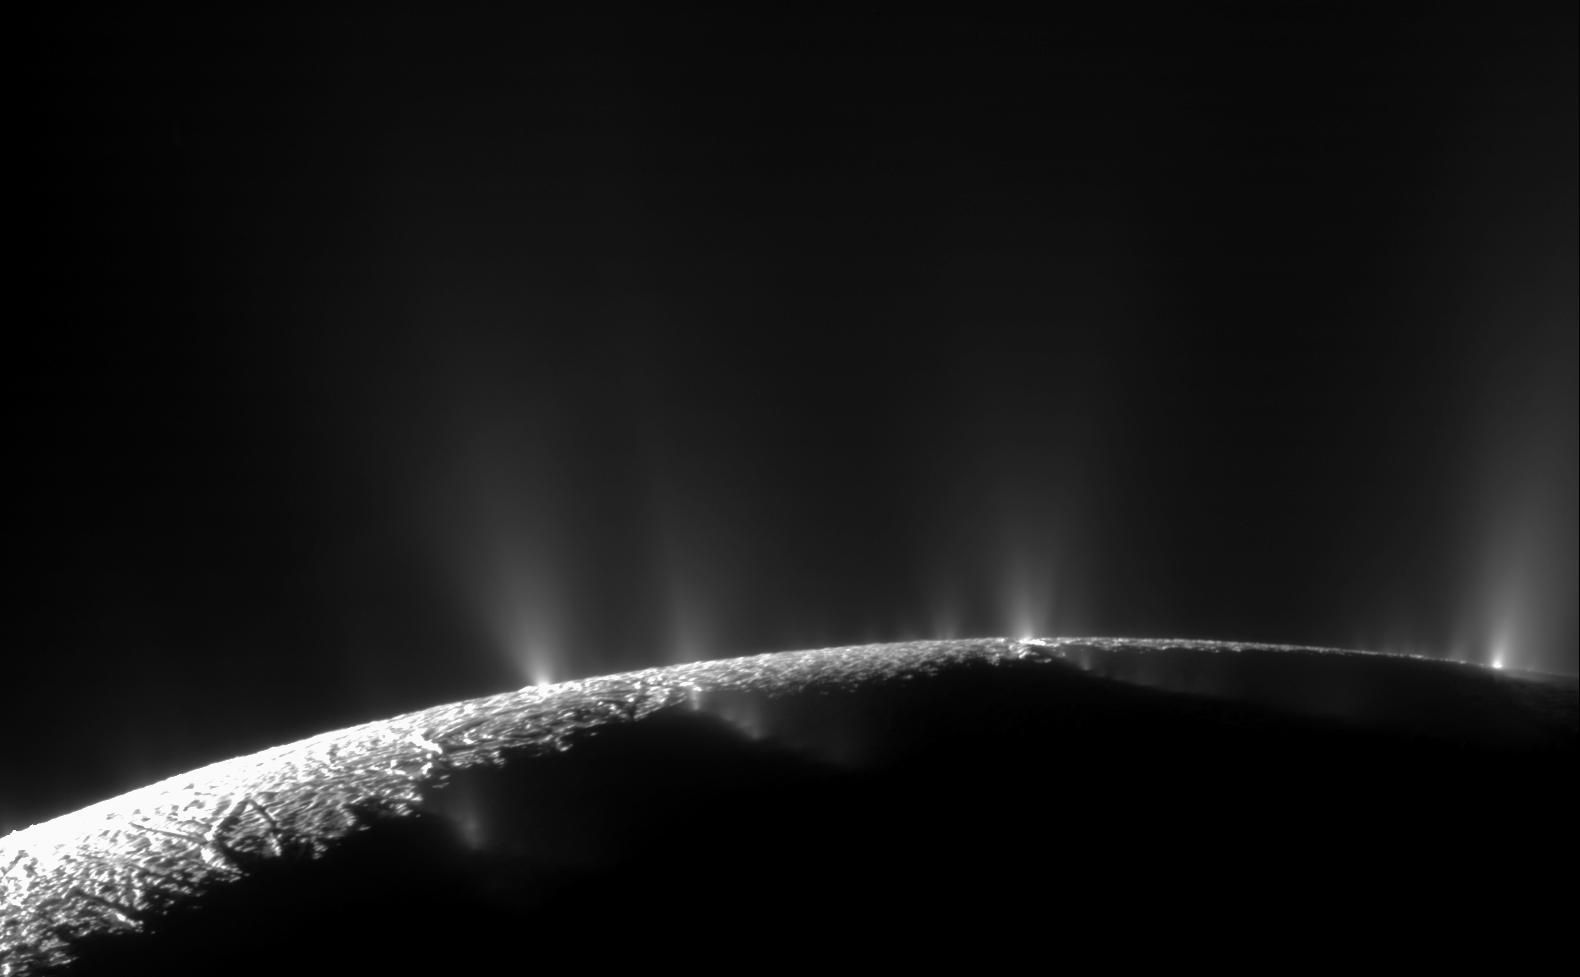 NASA's Cassini spacecraft captured dramatic plumes, both large and small, spray water ice out from many locations along the famed 'tiger stripes' near the south pole of Saturn's moon Enceladus.